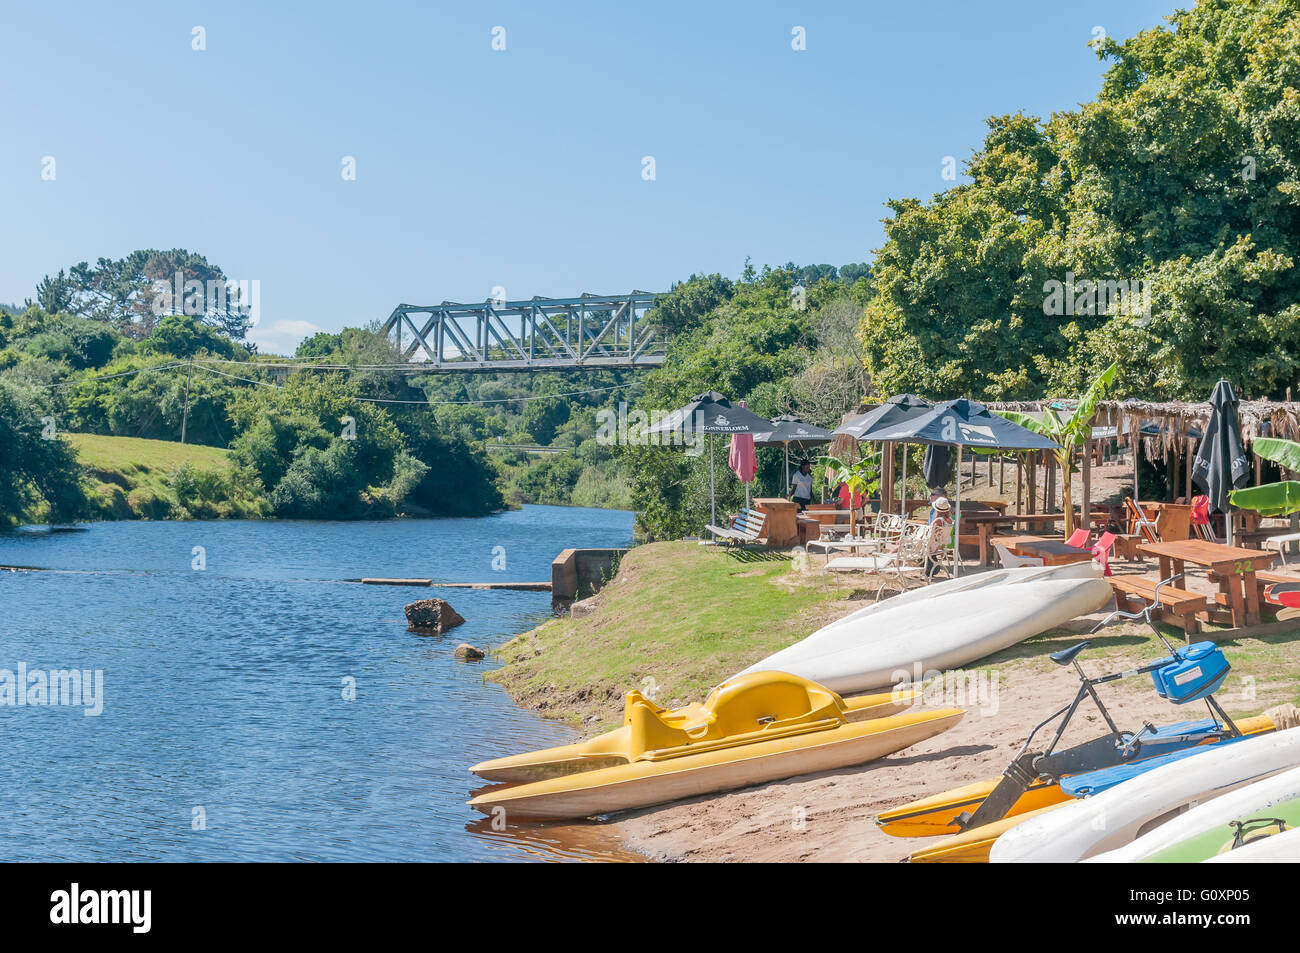 KNYSNA, SOUTH AFRICA - MARCH 3, 2016: A resort next to the Goukamma River with a railway bridge Stock Photo